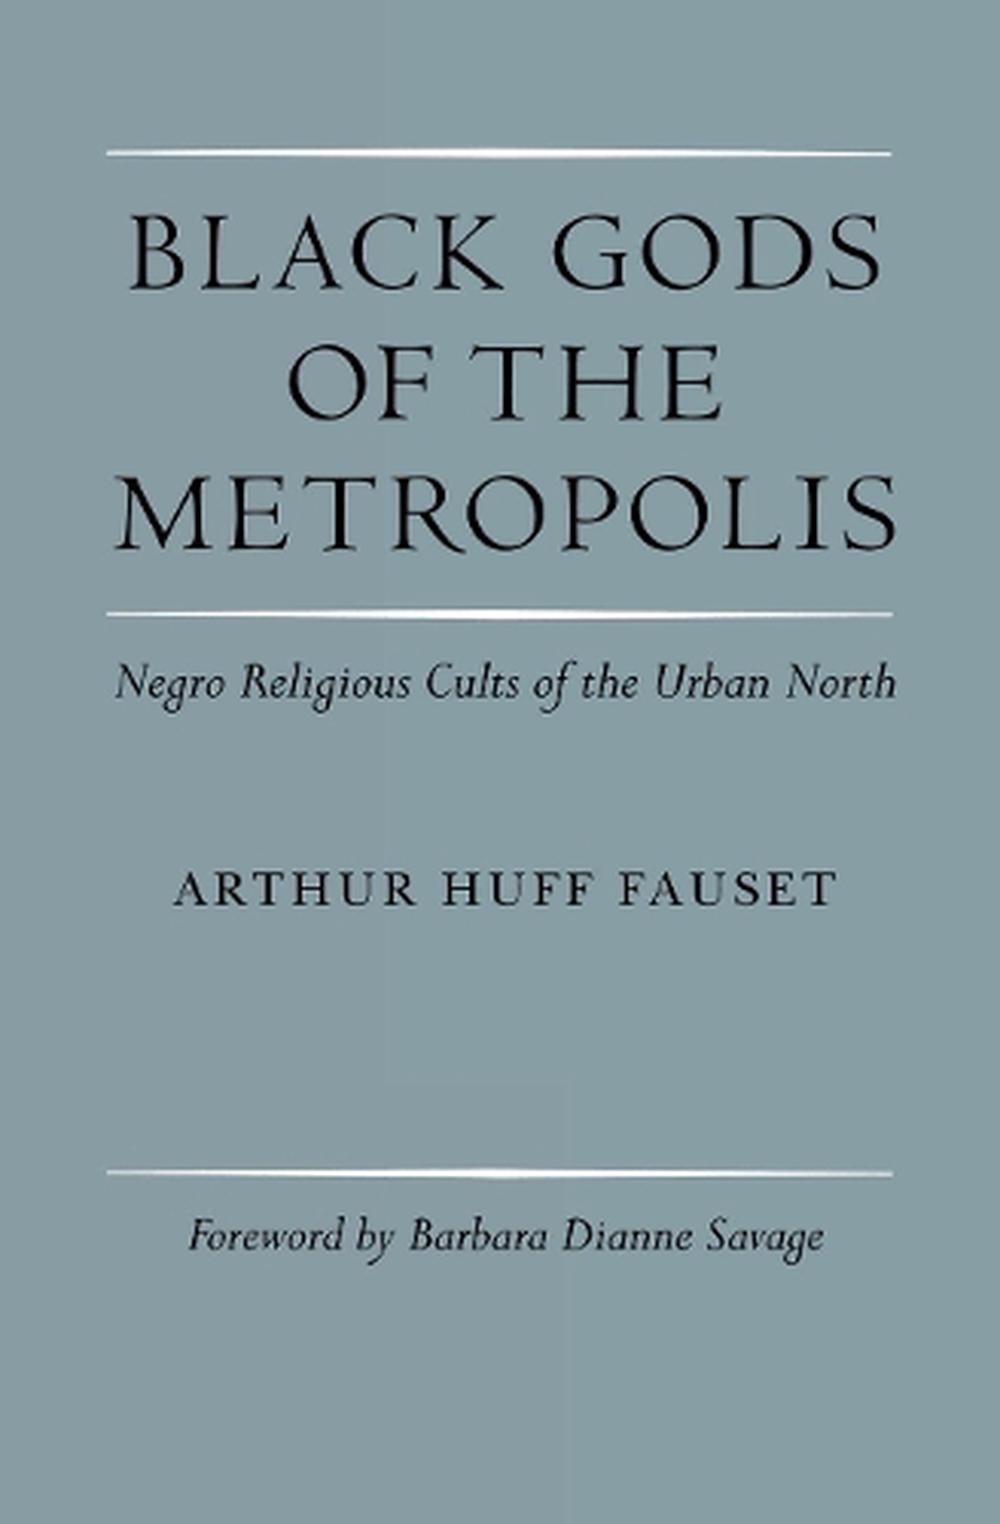 Black Gods of the Metropolis Negro Religious Cults of the Urban North